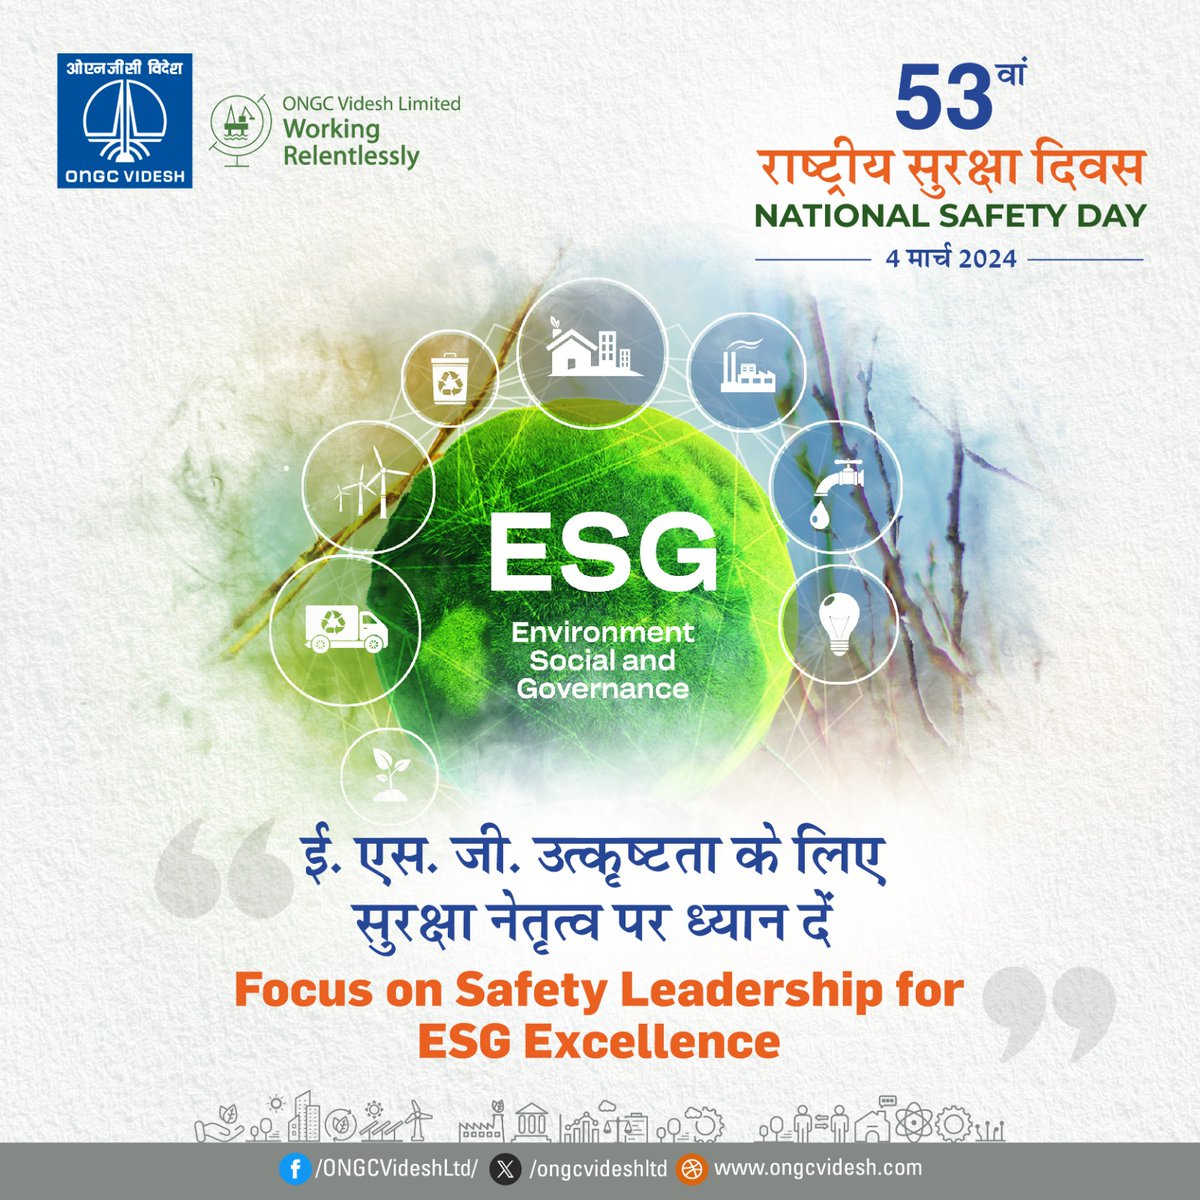 On the occasion of 53rd National Safety Day we reaffirm our pledge to uphold the highest safety standards, empower our teams with leadership skills, and drive towards ESG excellence. With 32 projects spread over 15 countries, @ongcvideshltd , not only commemorates the importance…